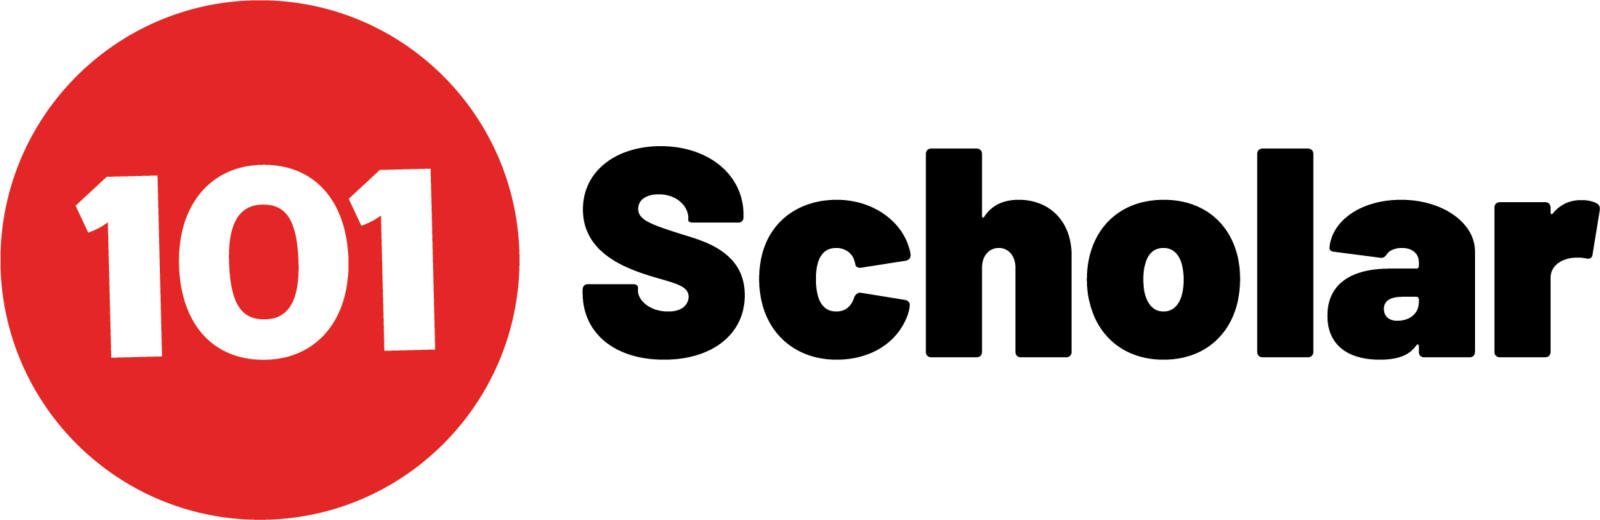 101 Scholar | Scholarships for College